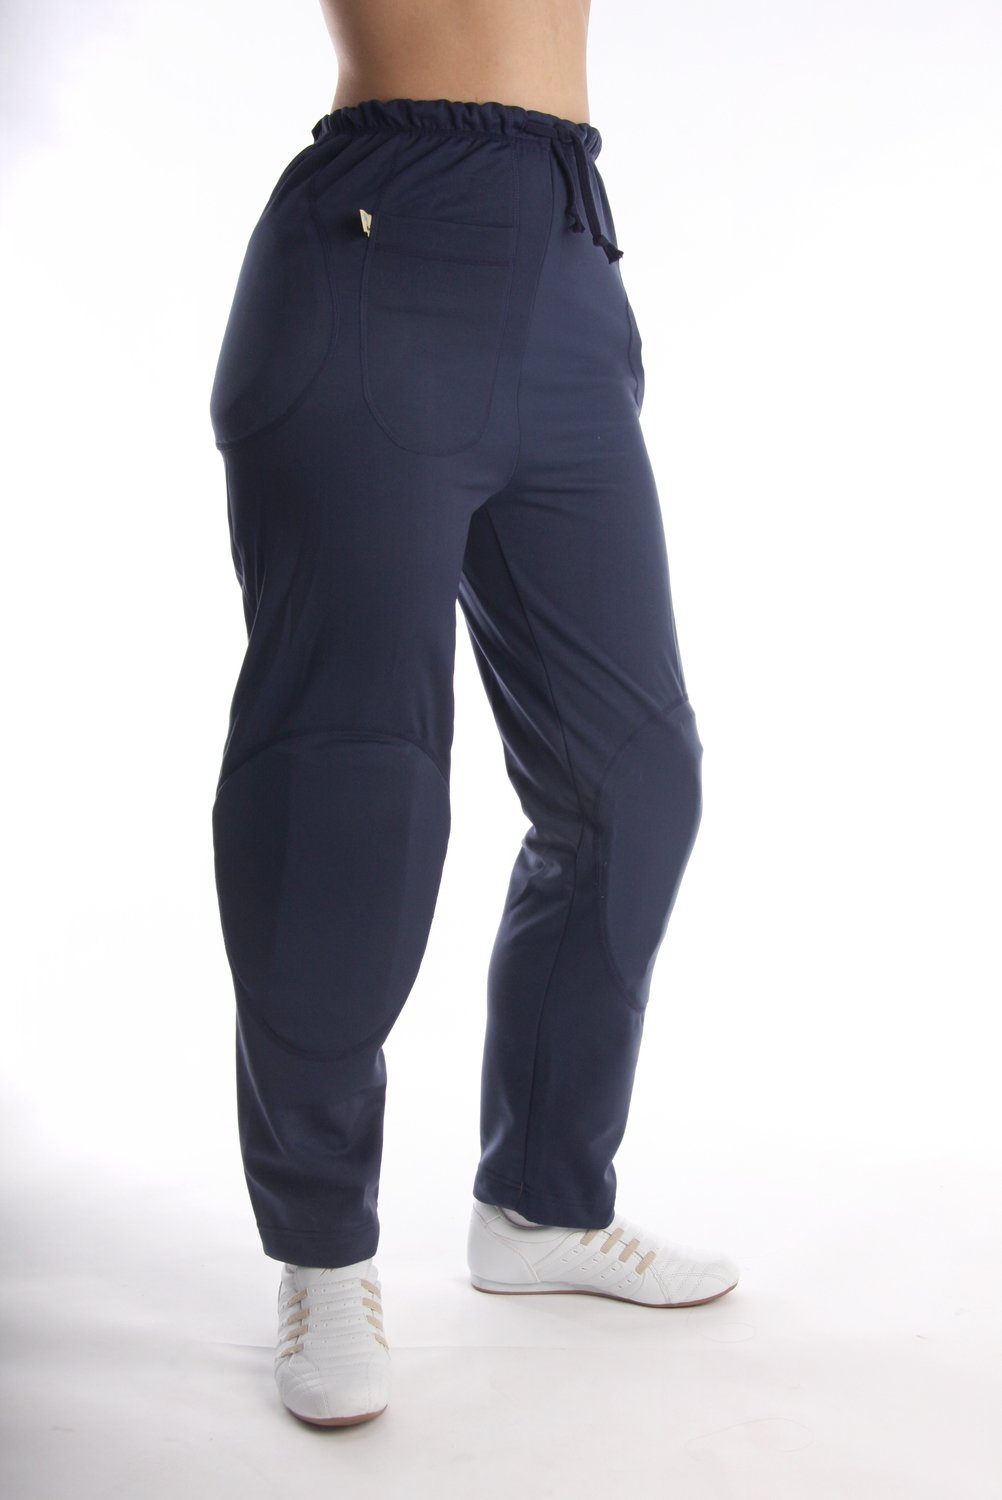 HipSaver Track Pants High Compliance Regular Under 170cm with Knee Protection XXLarge - Hips 128-146cm